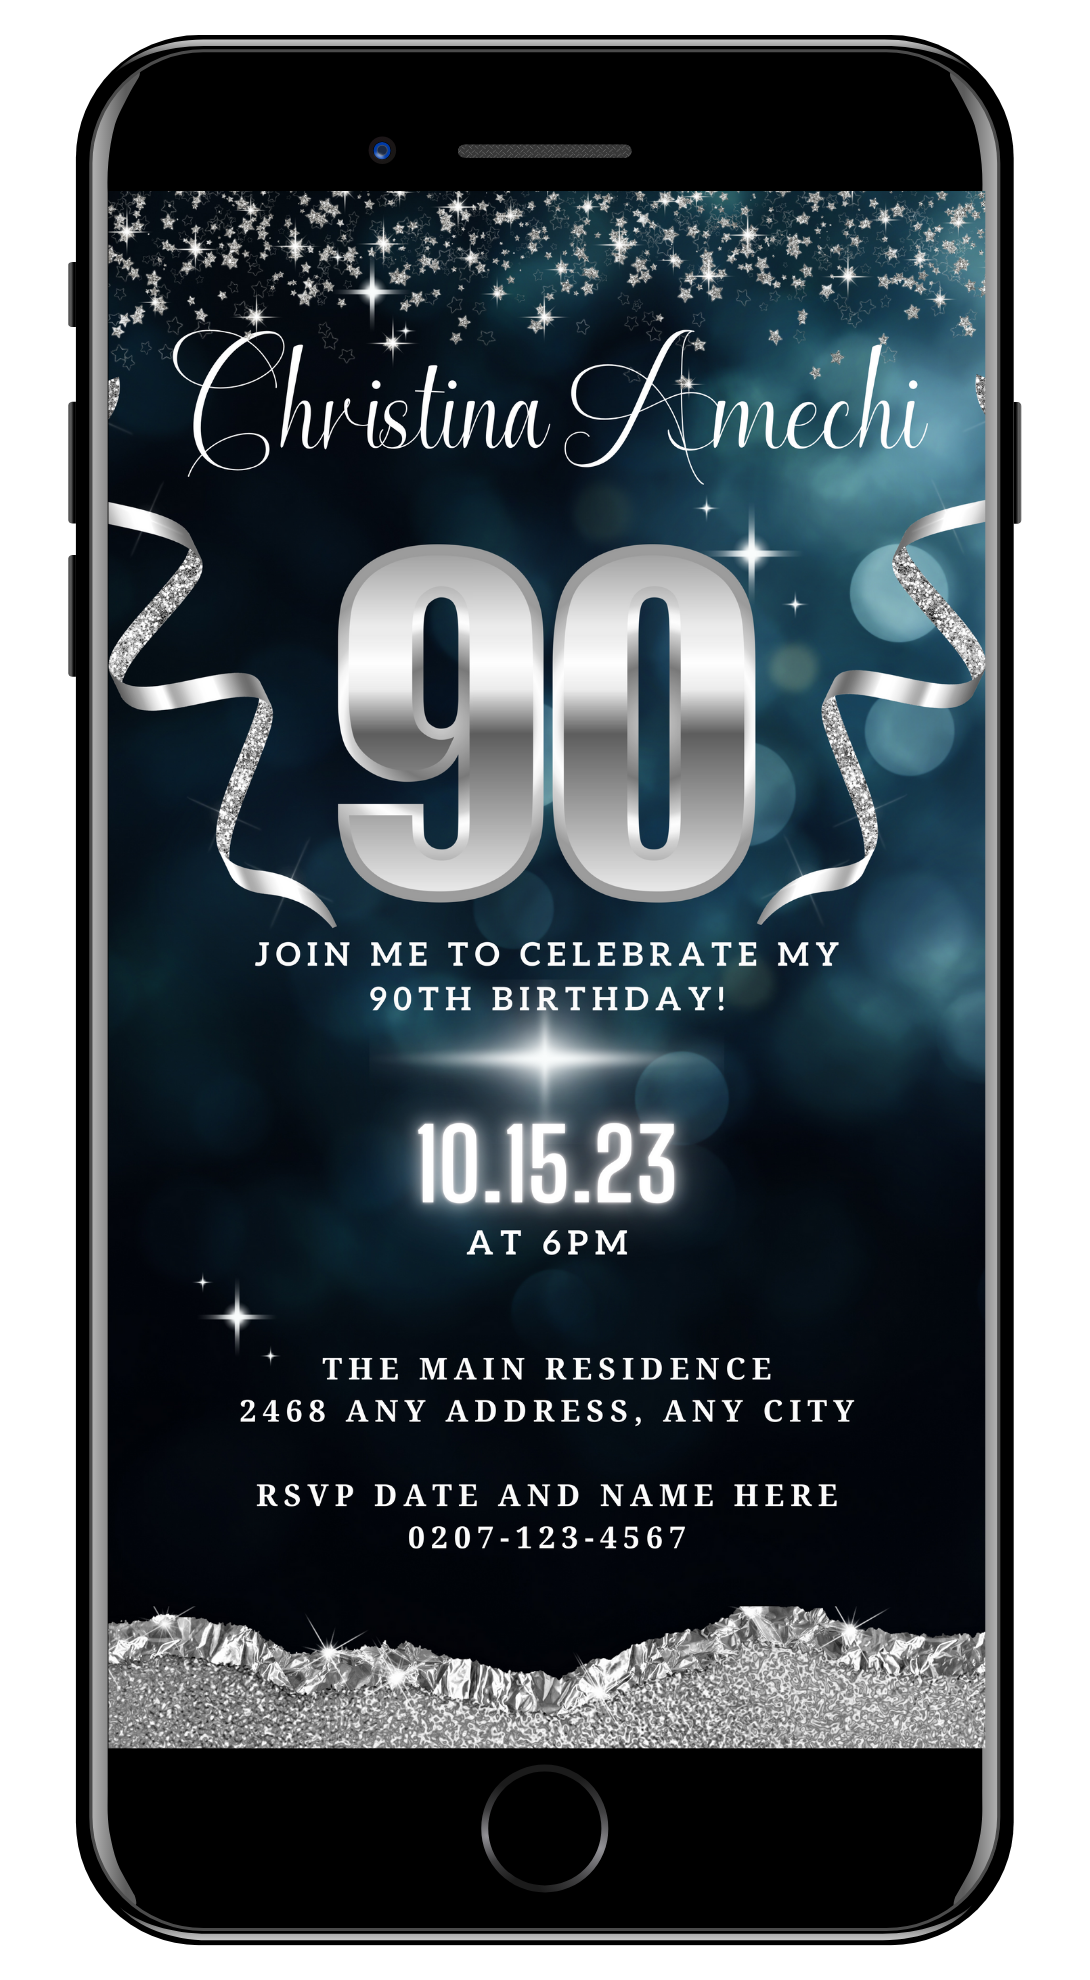 Customizable Digital Navy Blue Silver Glitter 90th Birthday Evite displayed on a smartphone screen, showcasing editable text and graphics for personalizing event details using the Canva app.